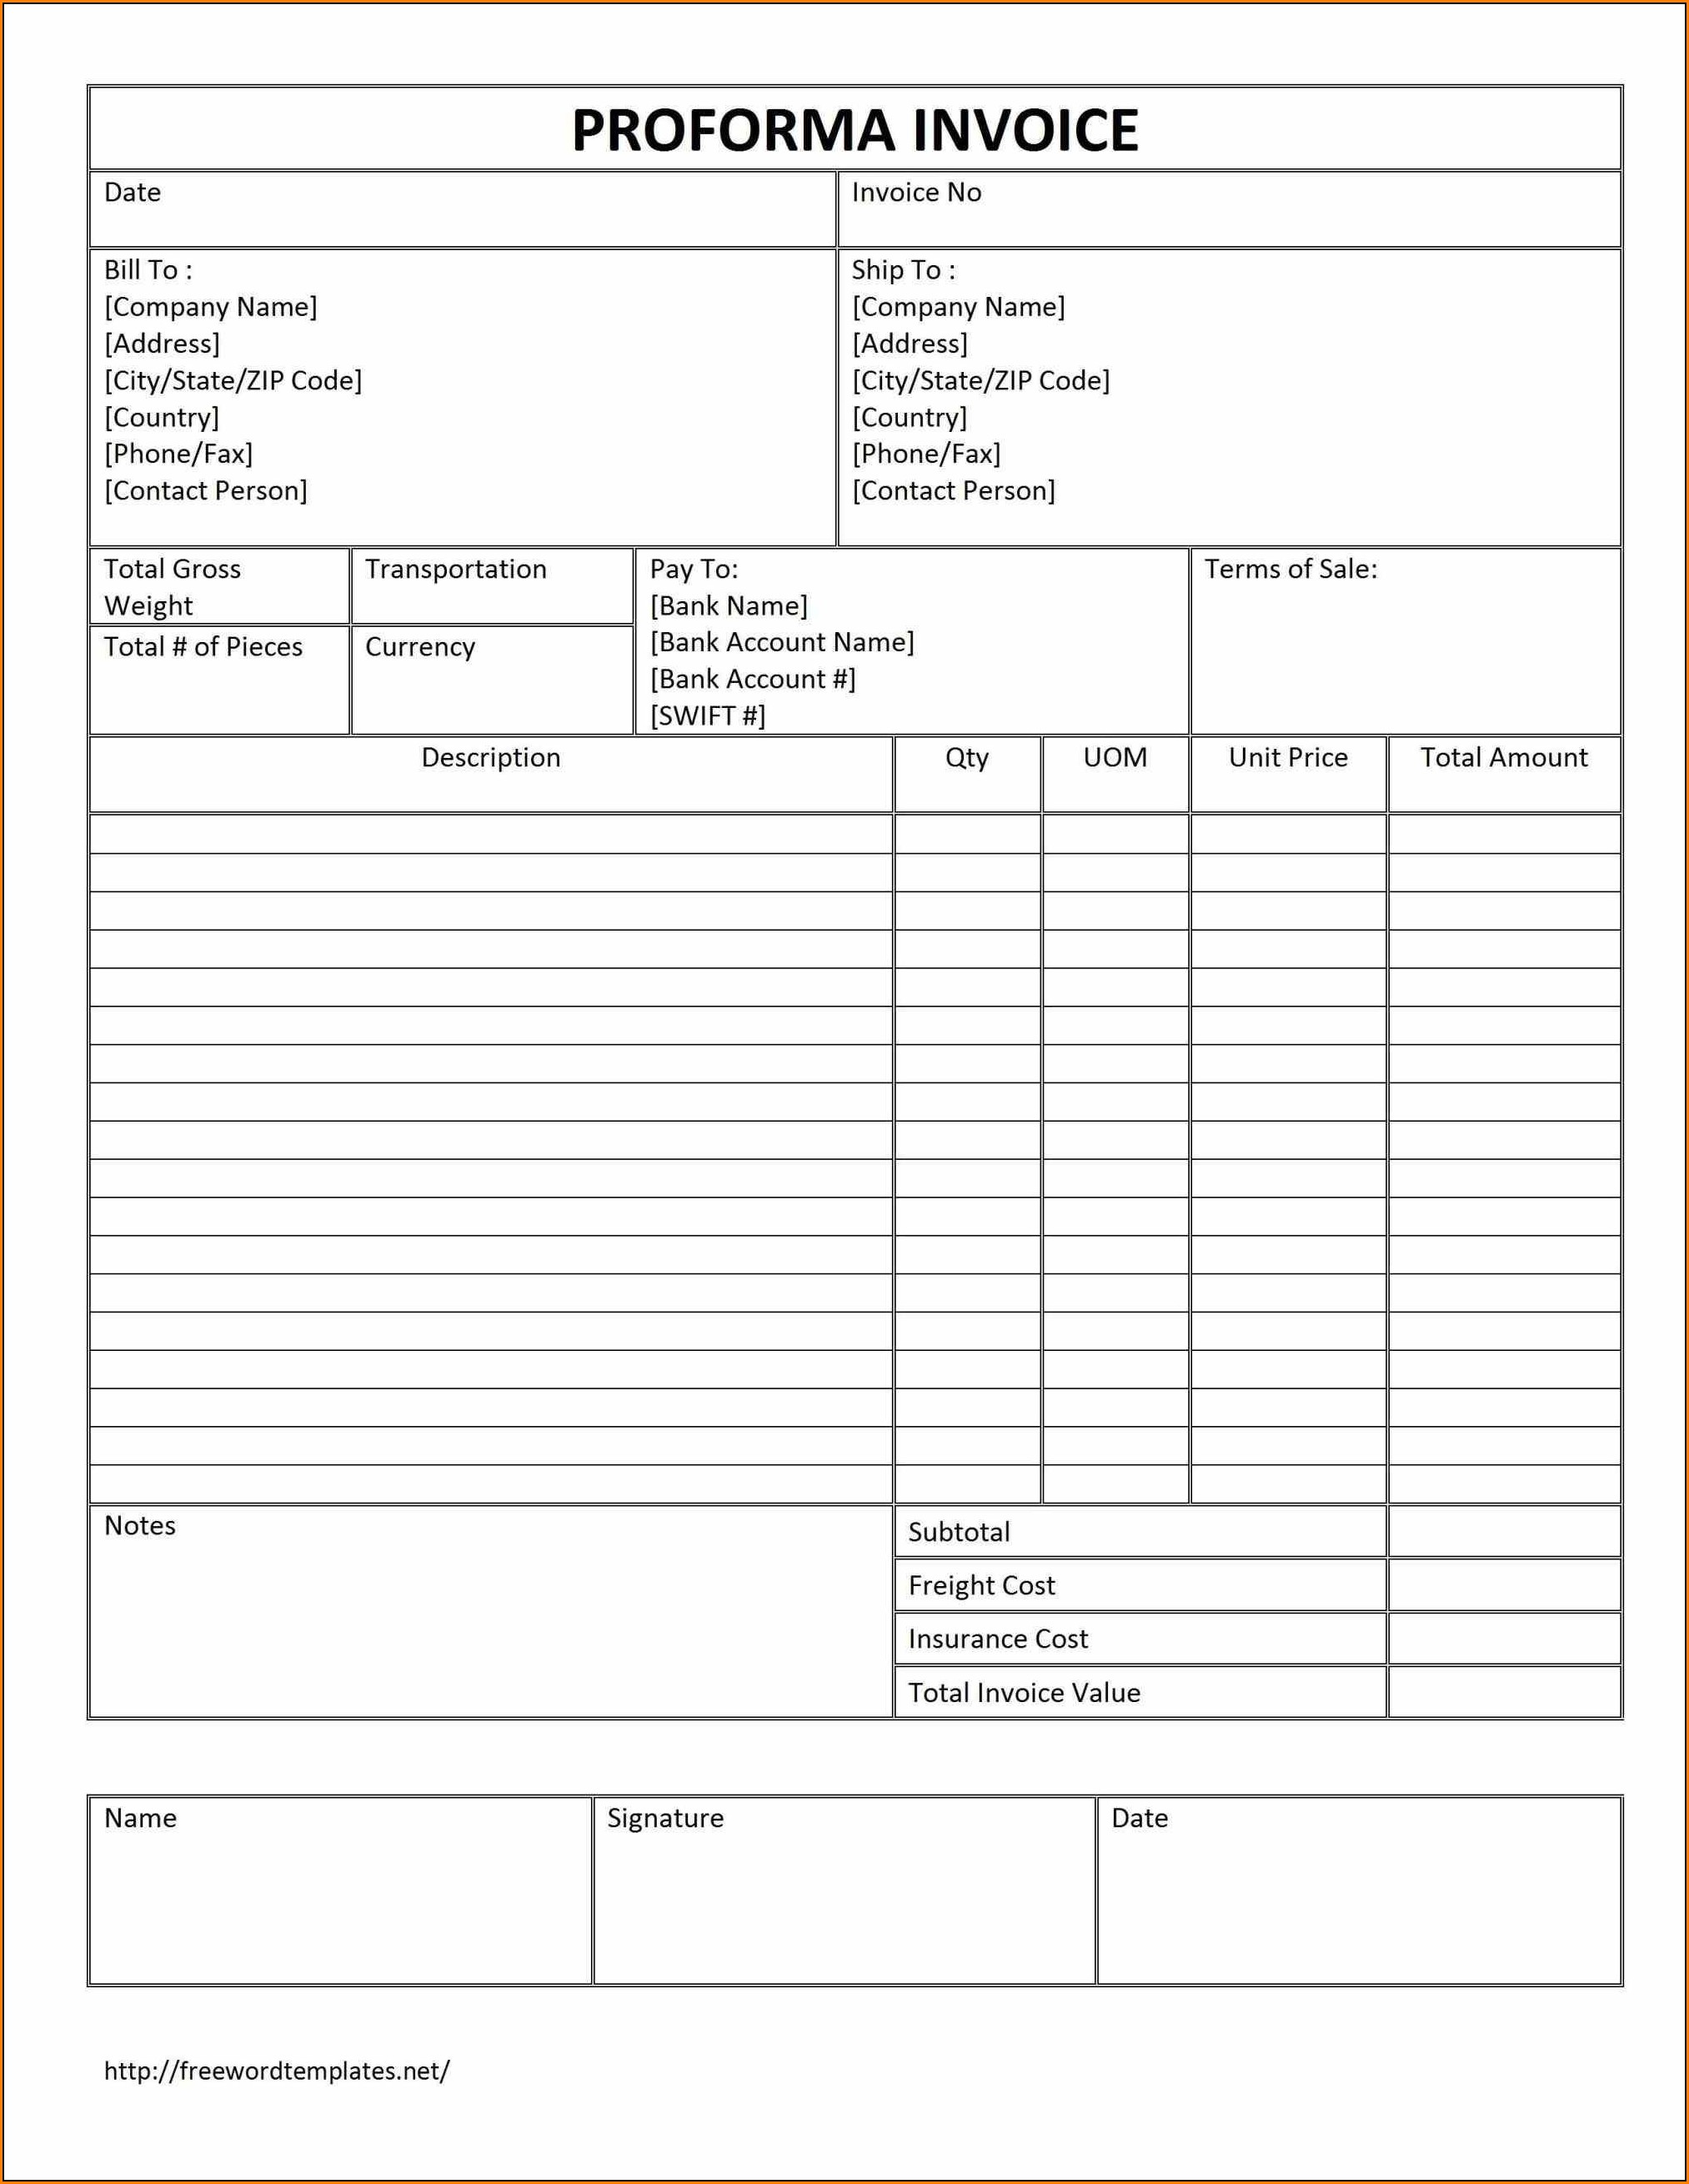 Blank Pay Stub Template Excel